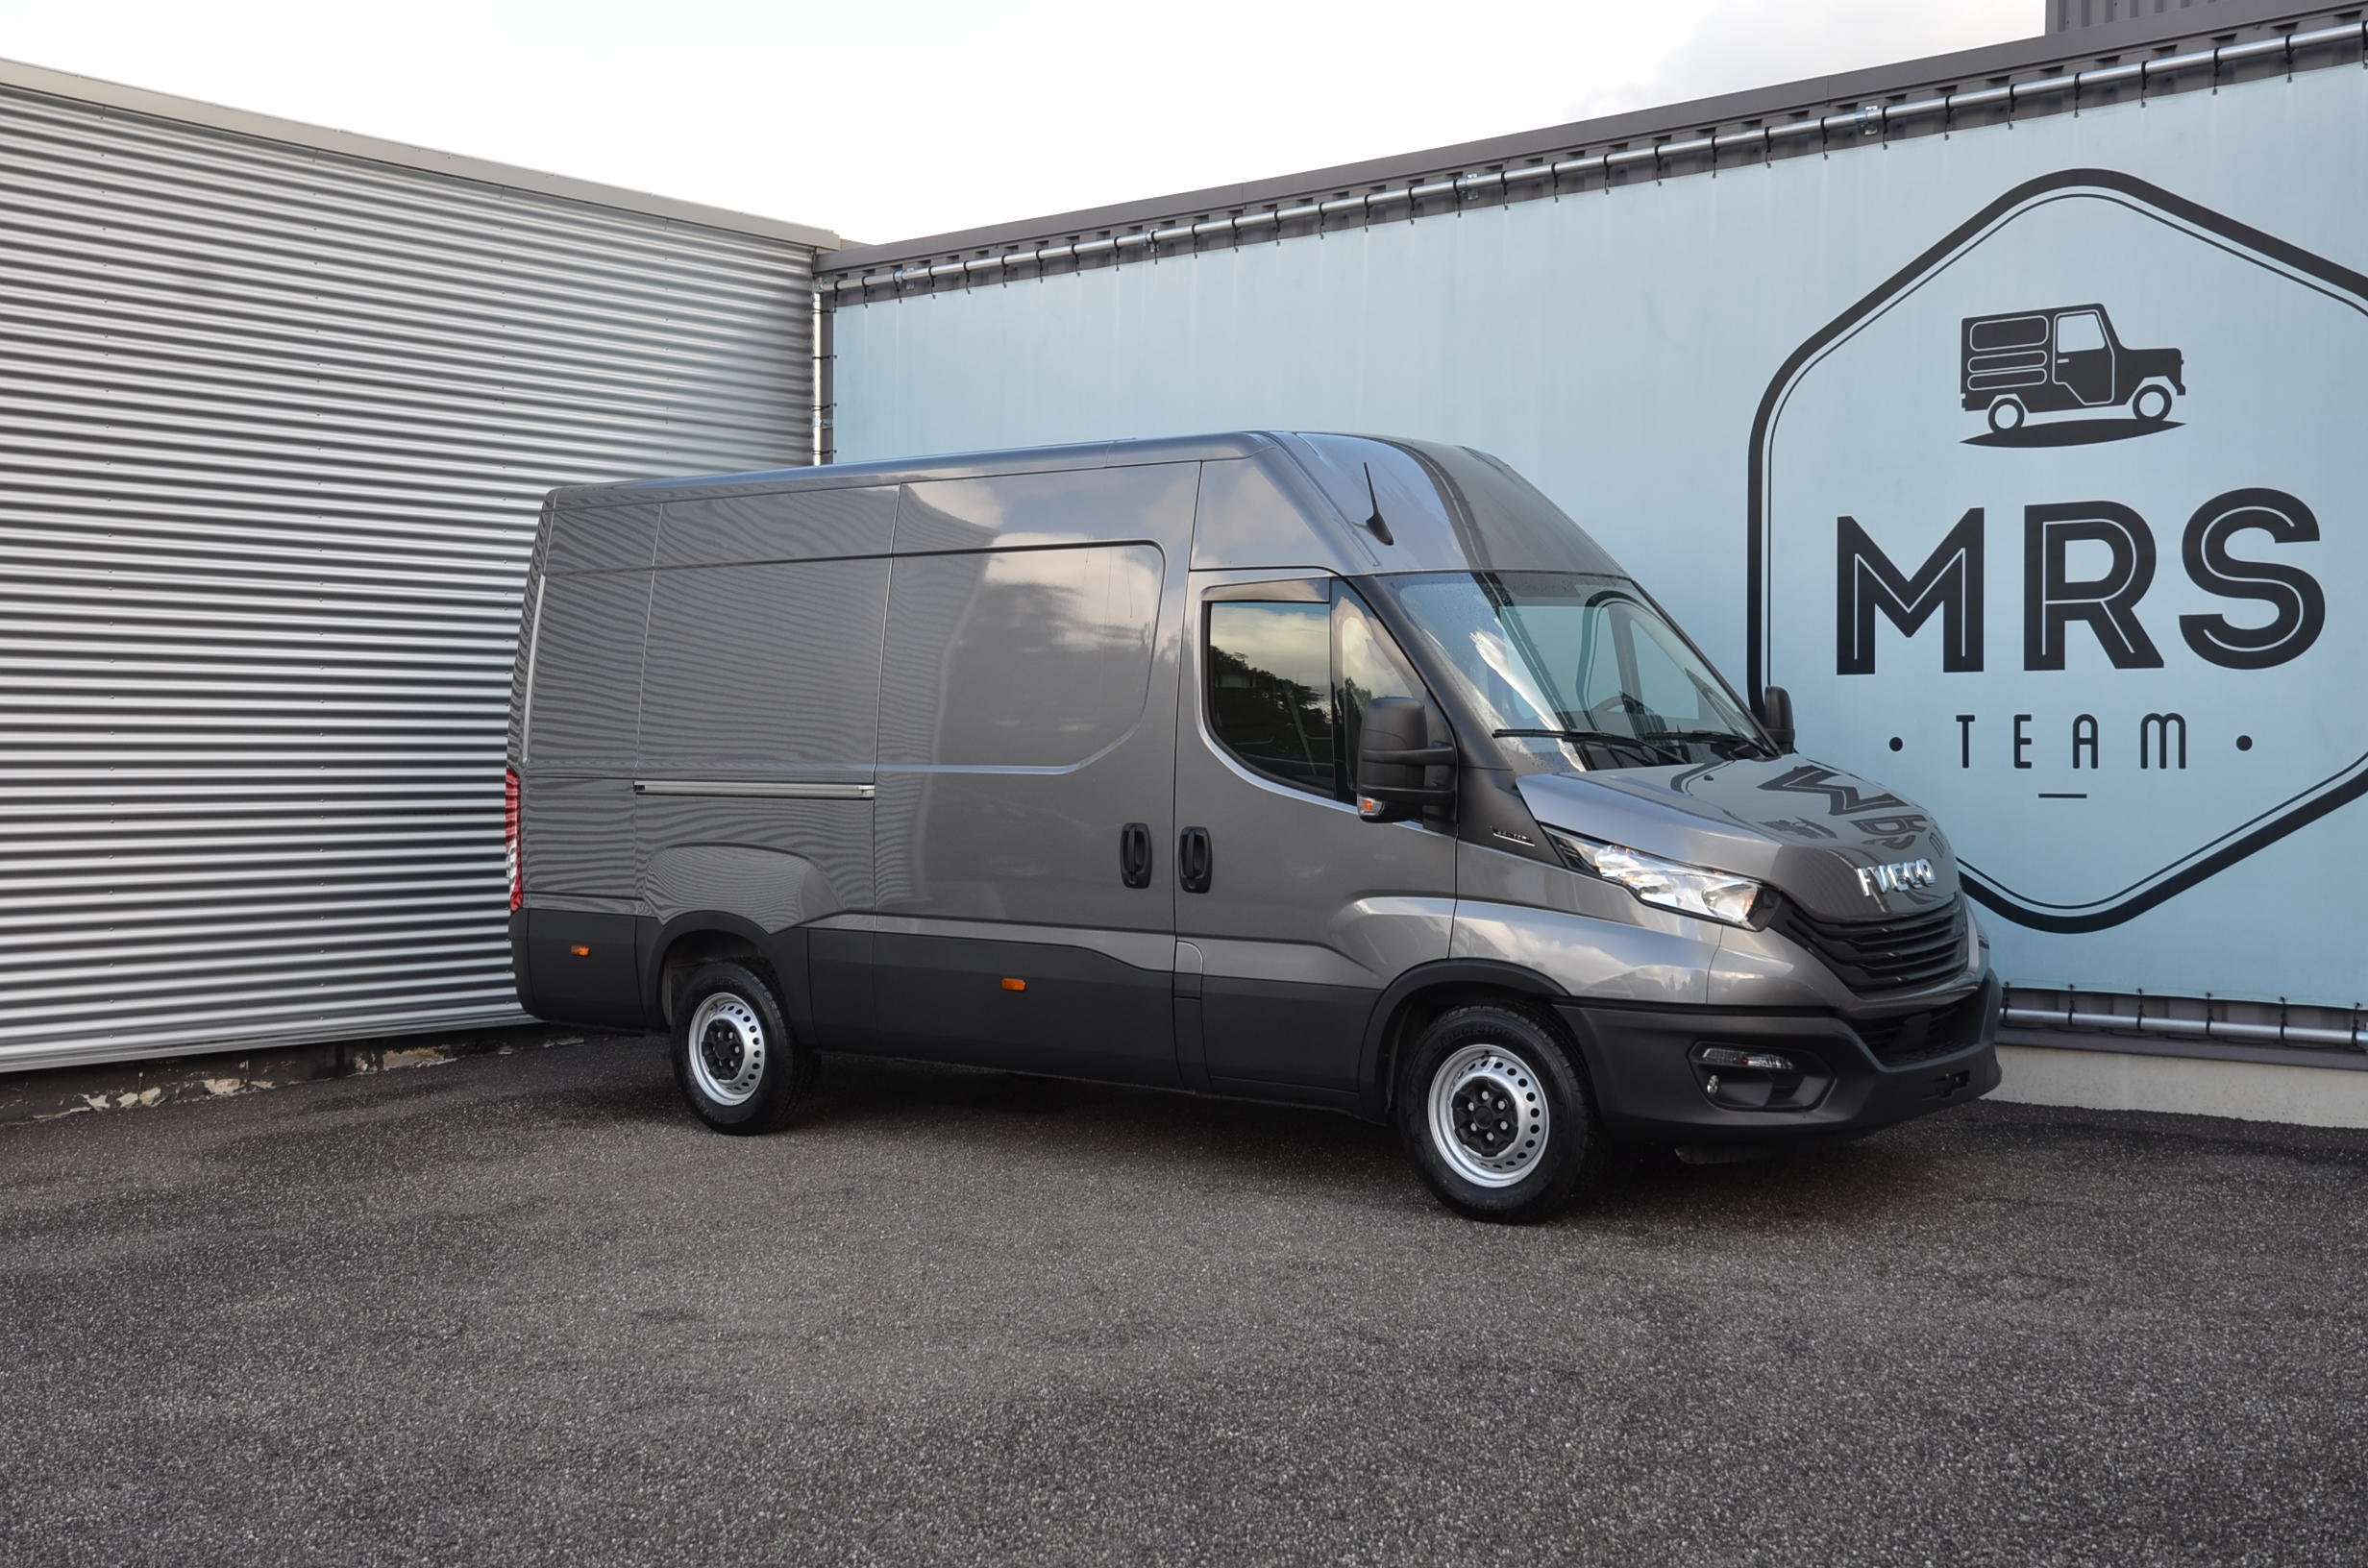 Iveco Daily Transporter in Grey pre-registered in Houthalen for € 44,165.-